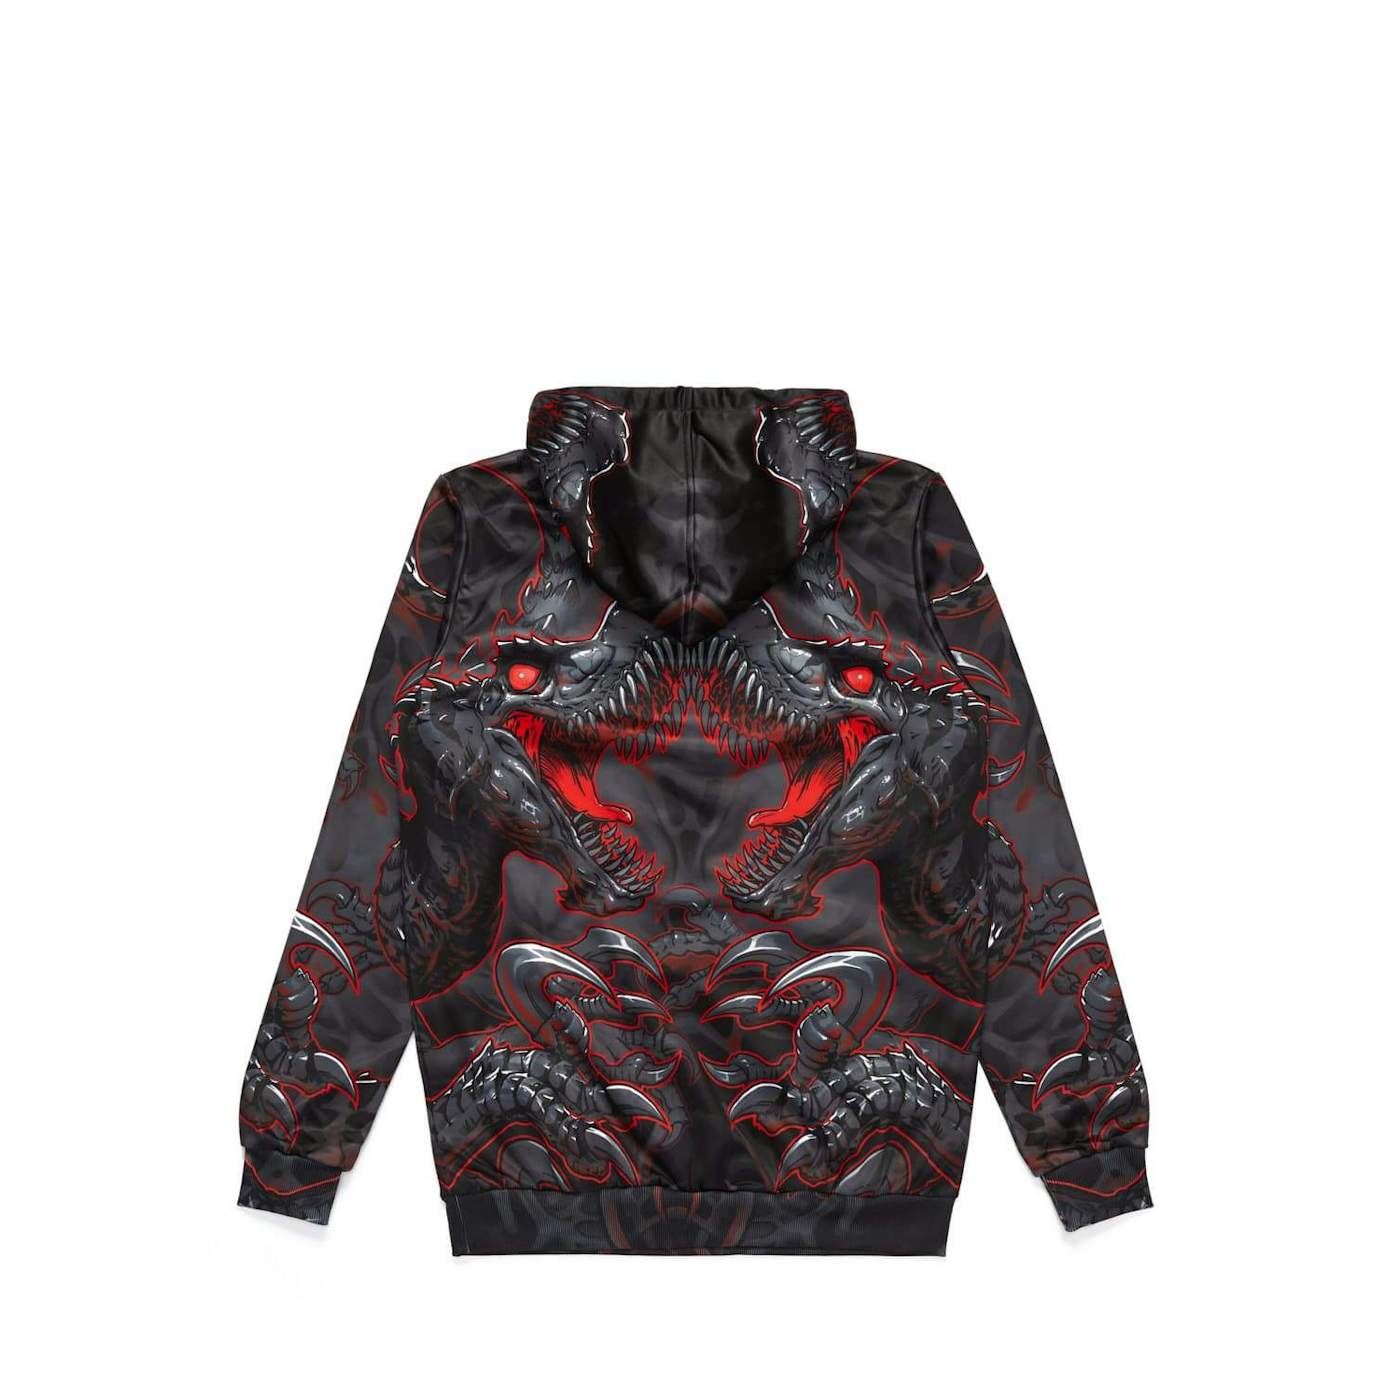 Excision 'Raptor Attack' Dye Sub Hoodie - Red